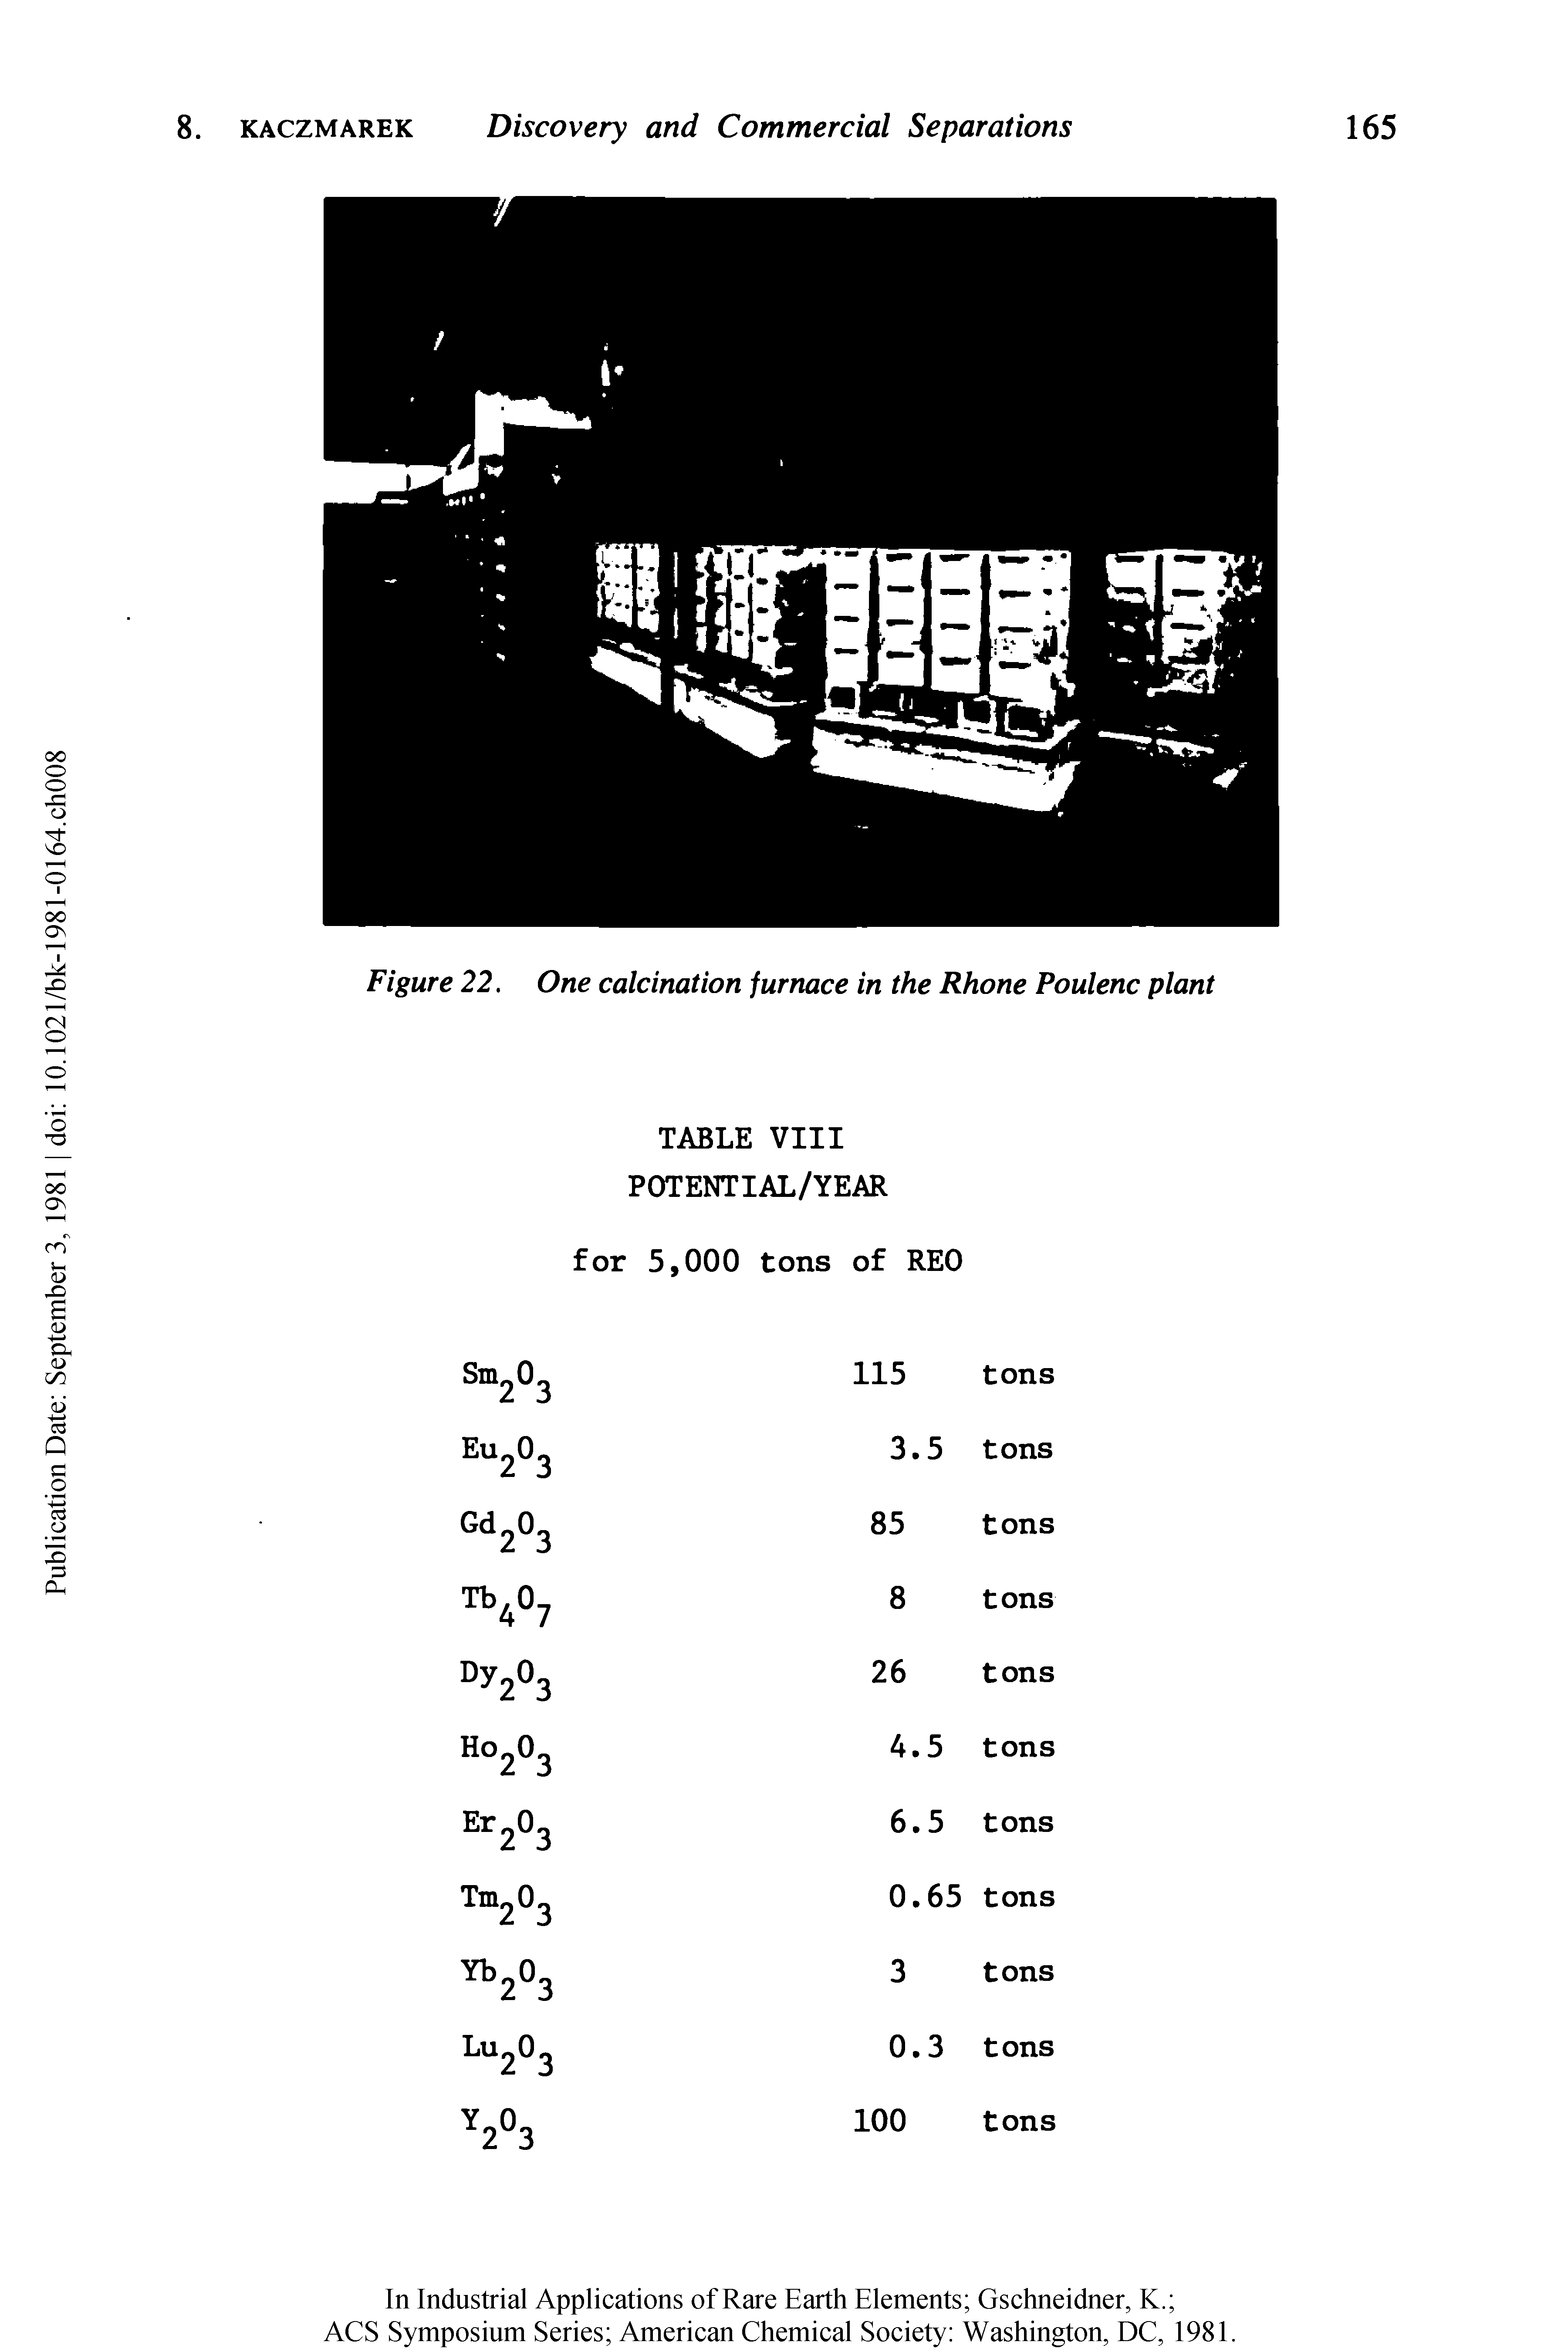 Figure 22, One calcination furnace in the Rhone Poulenc plant...